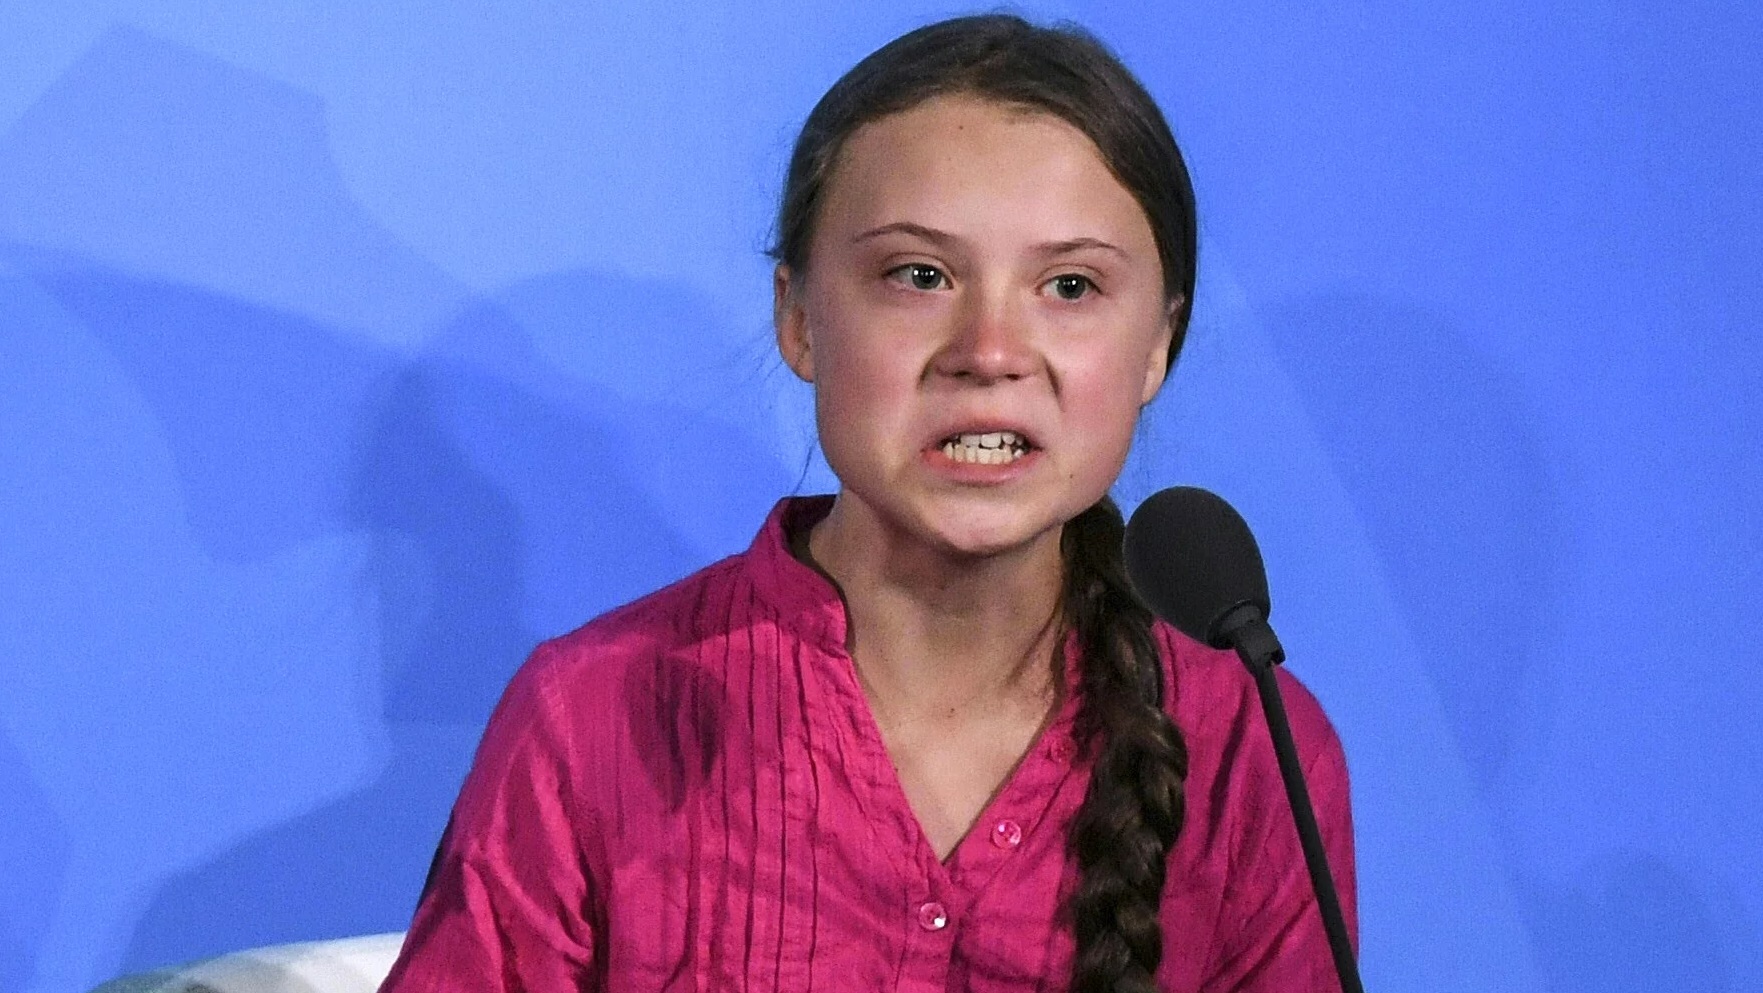 Image: Manufactured climate hysteria of Greta Thunberg a repeat of what Severn Cullis-Suzuki did back in 1992